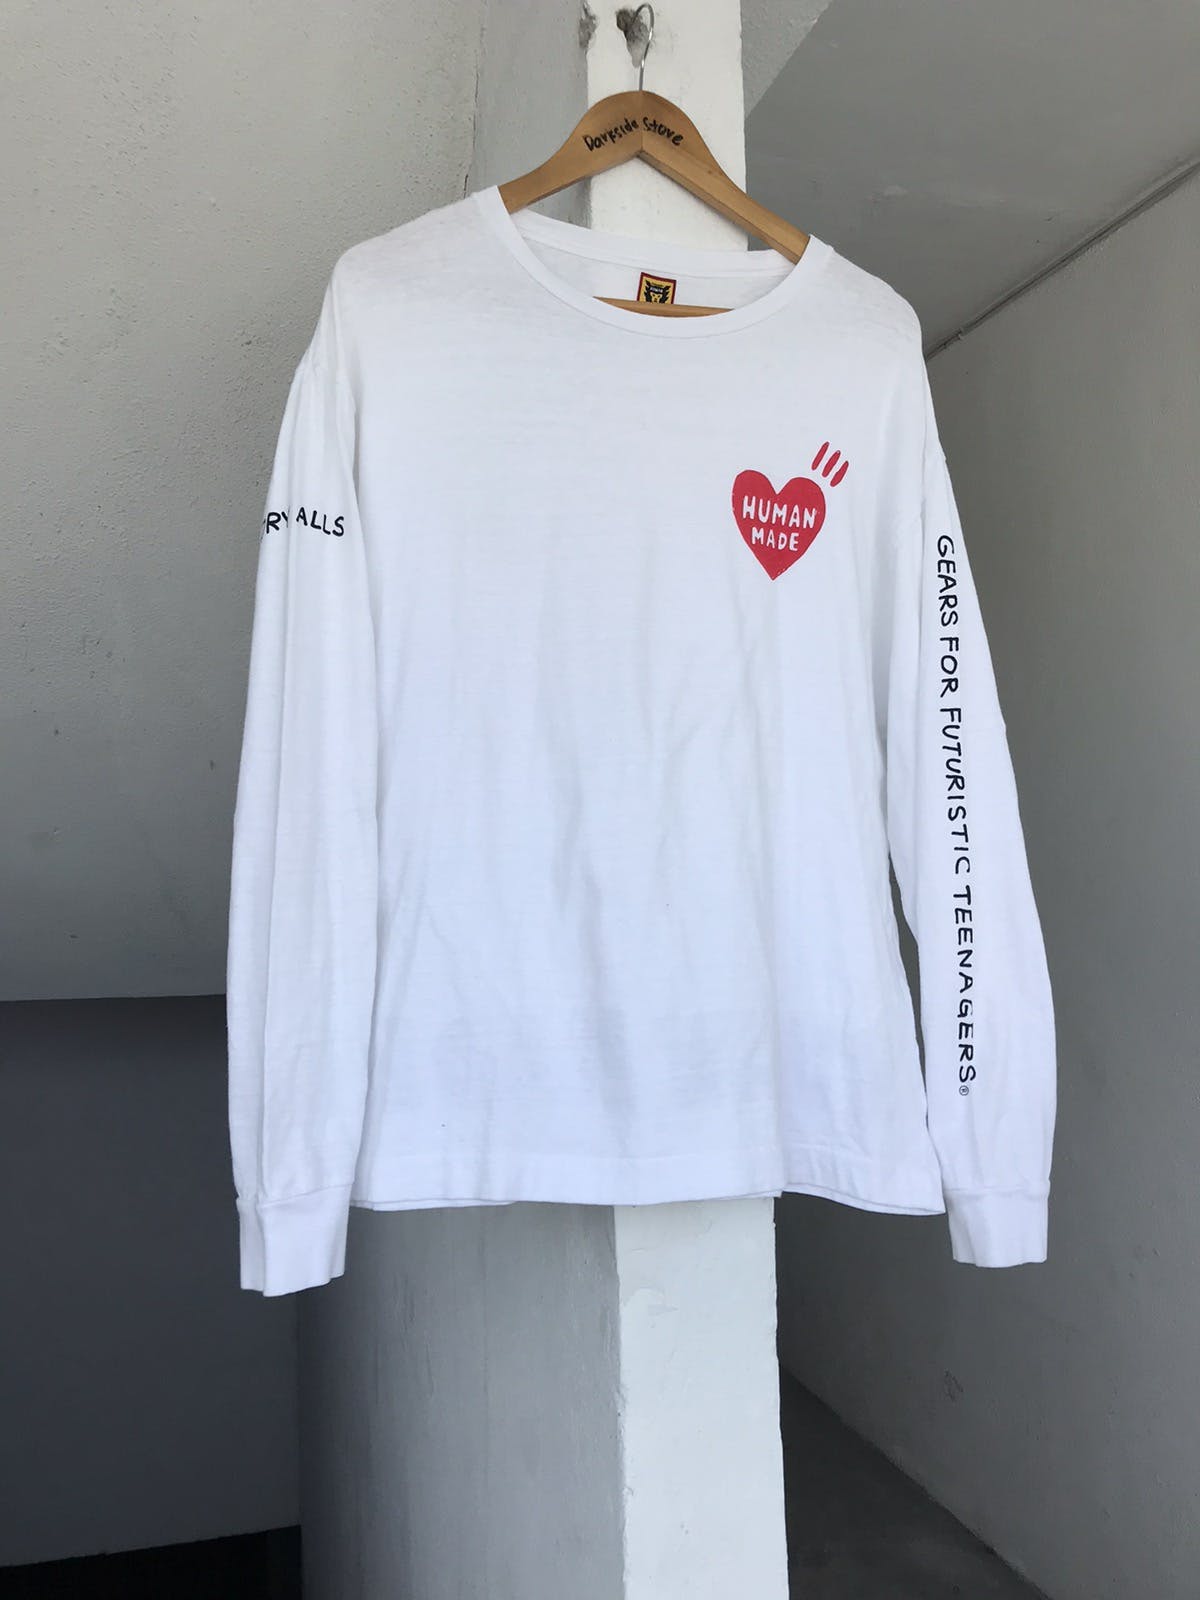 HumanMade Dry all Long Sleeve - 1